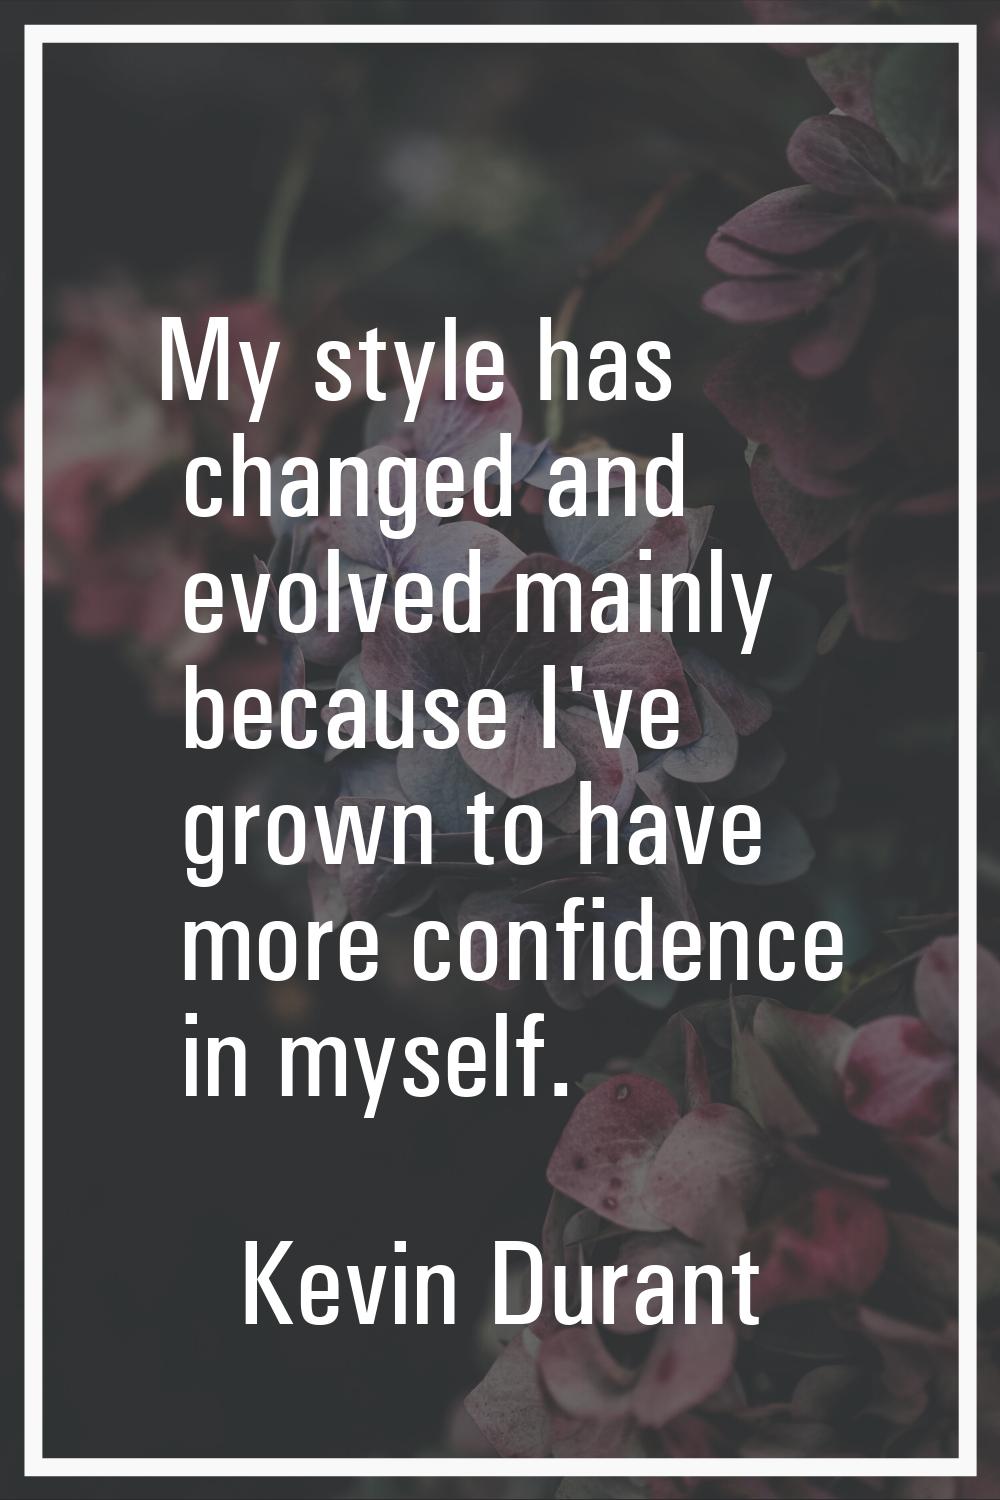 My style has changed and evolved mainly because I've grown to have more confidence in myself.